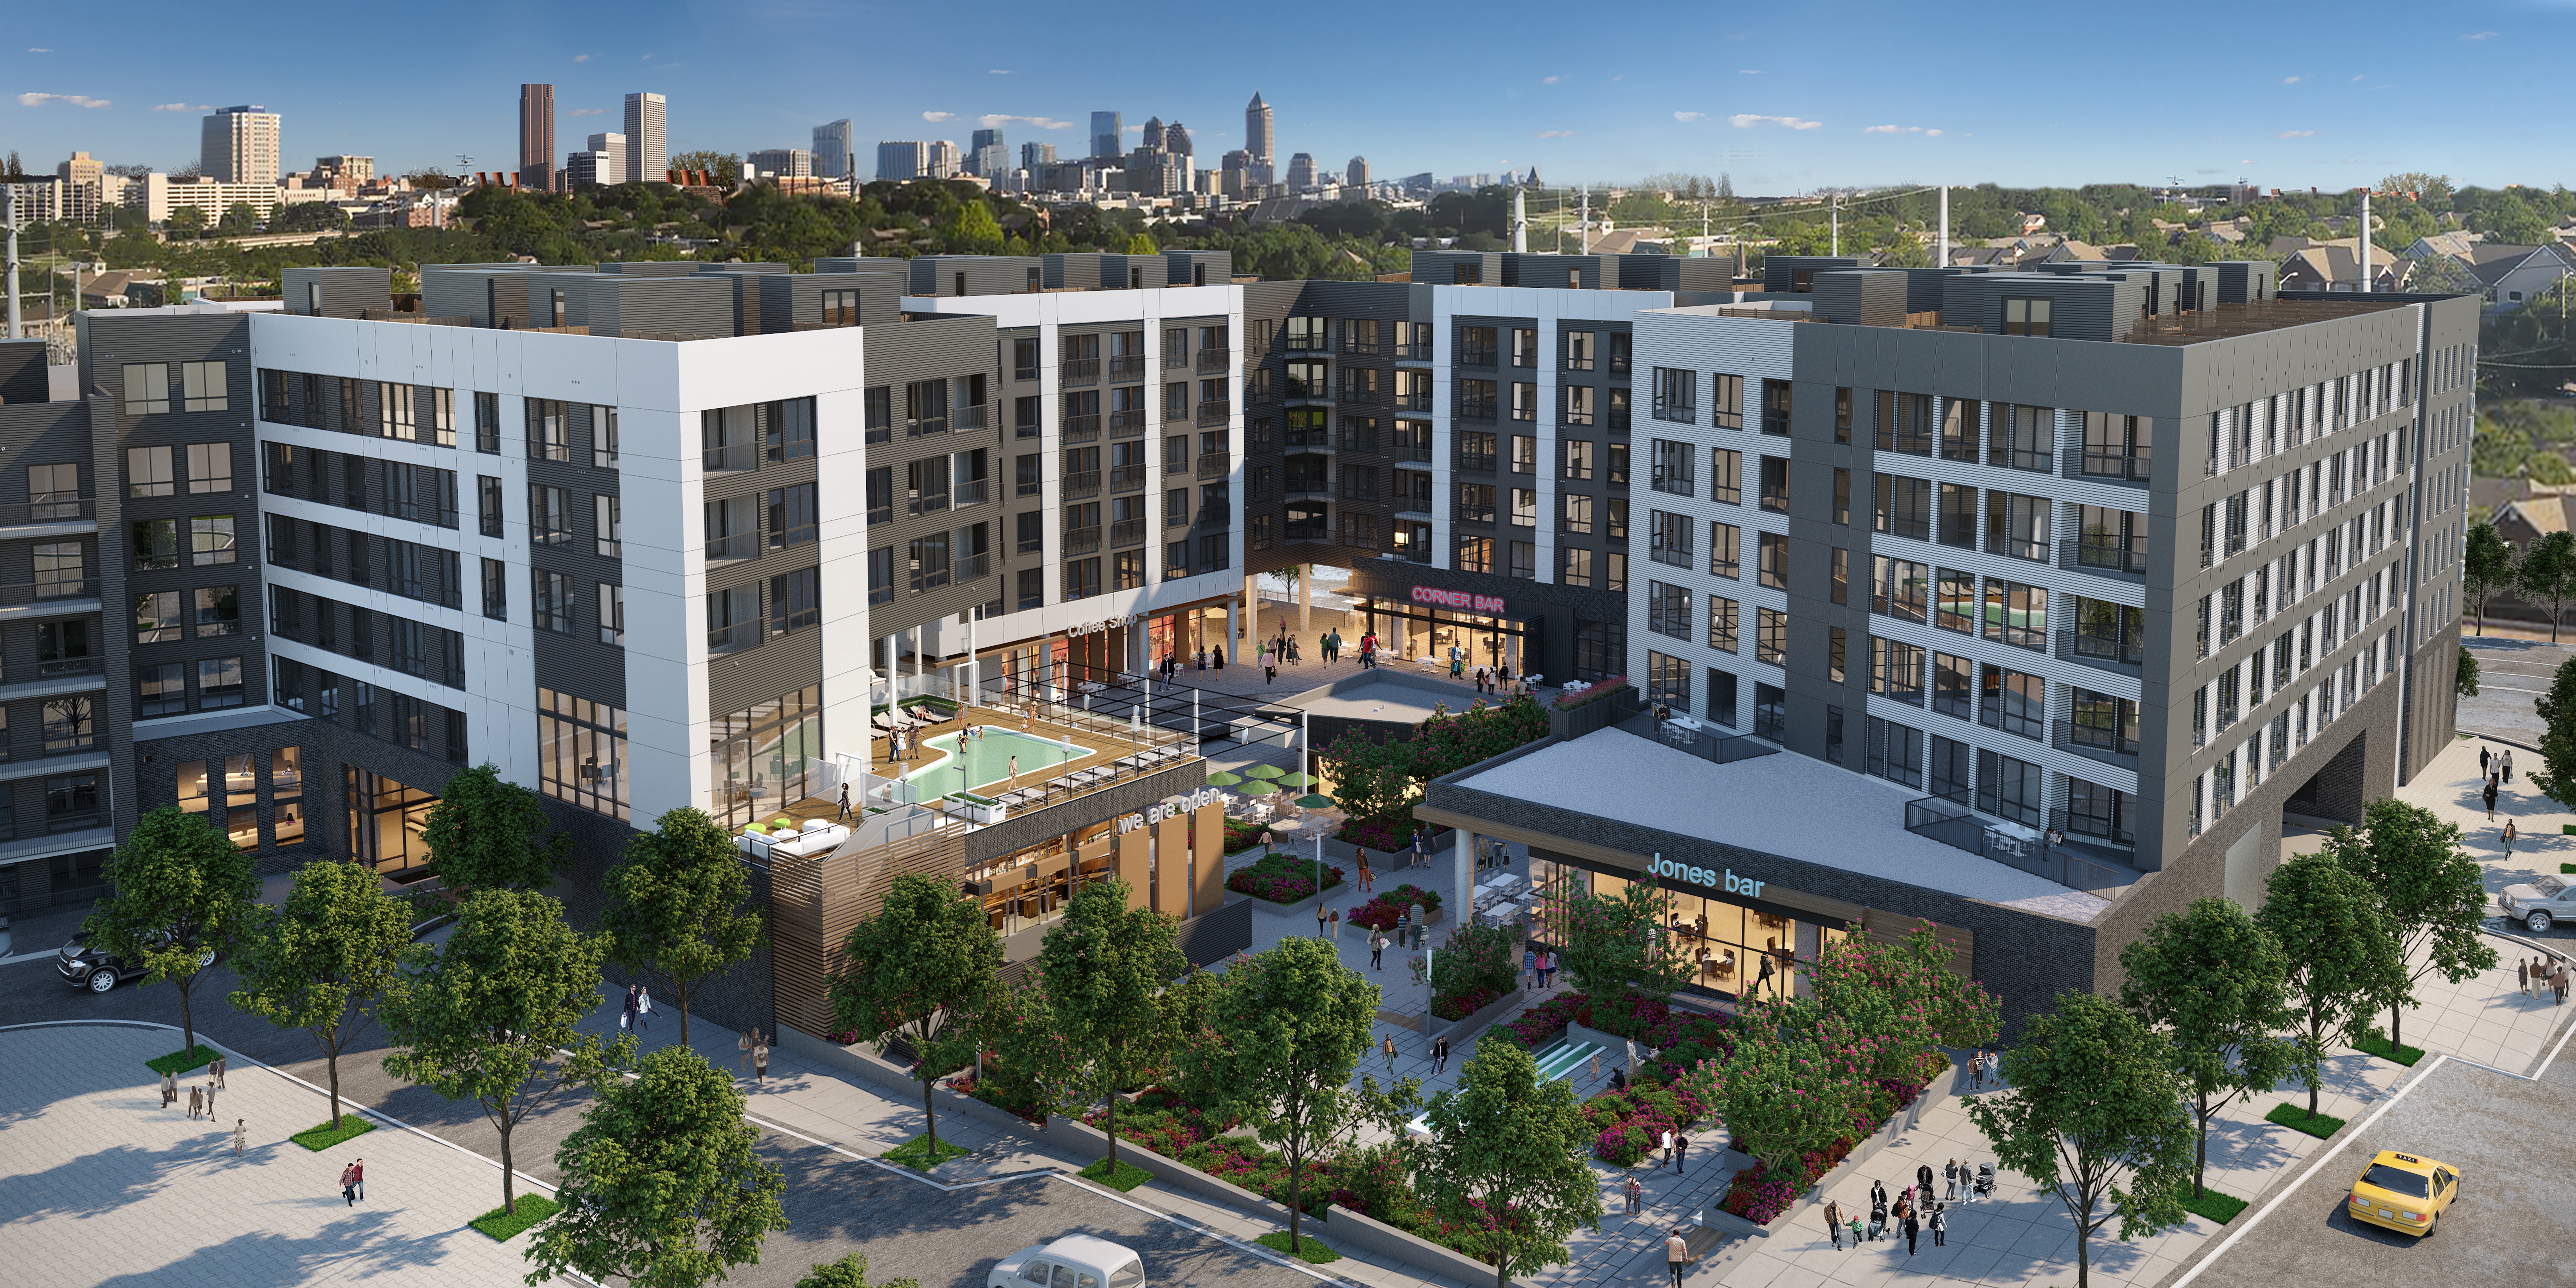 The project’s open-air retail plaza, with a creative reimagining of Midtown’s skyline beyond.